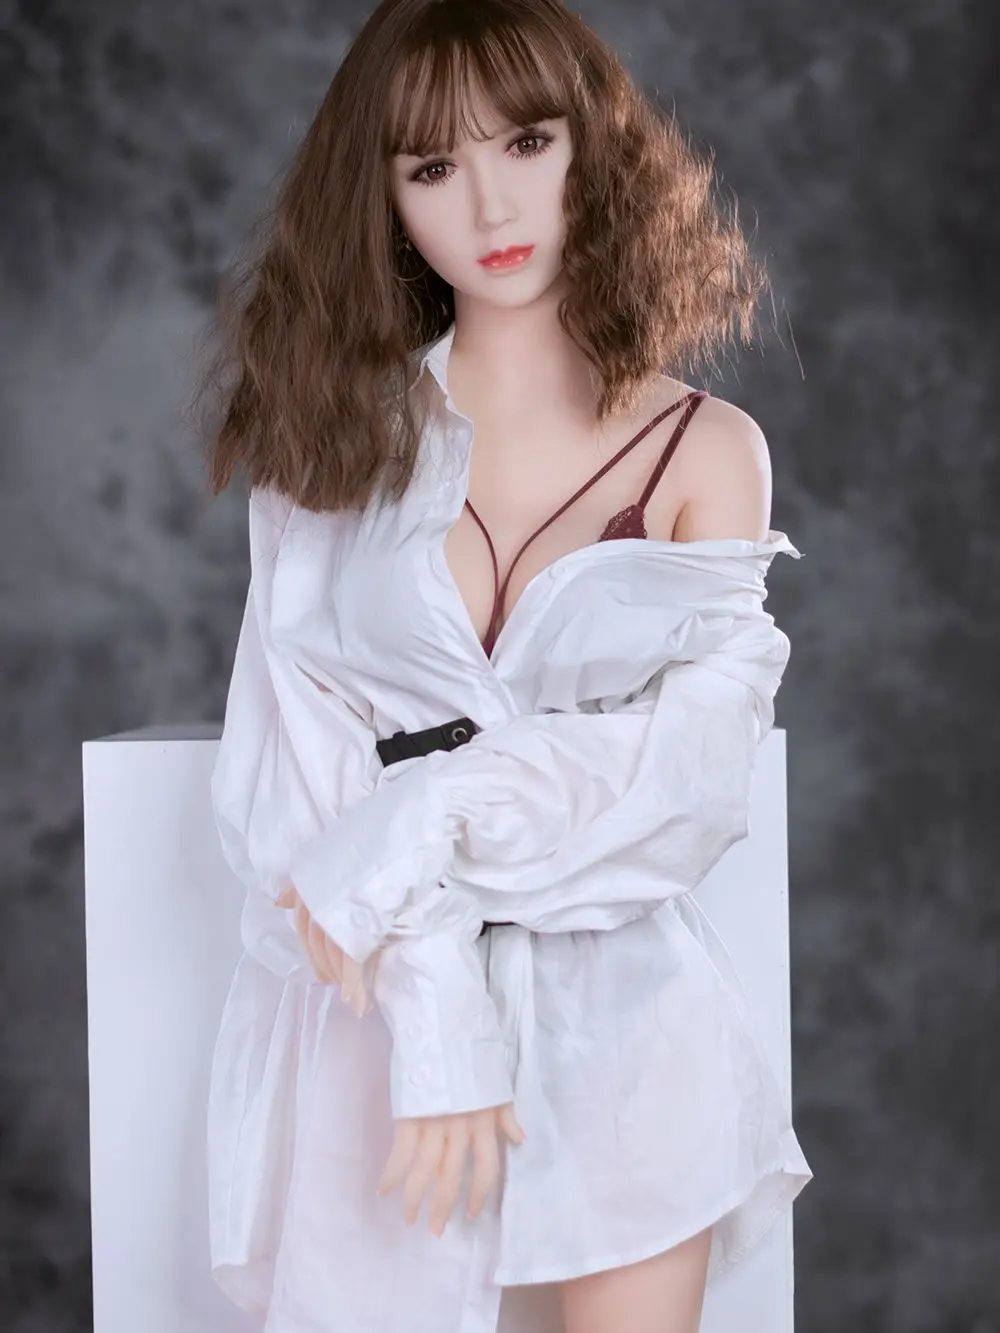 

Iesseiy Top Quality Big Breast Real Love Doll for Men Japanese Sex Dolls Real Dolls Realistic Vagina Pussy Sexual Toy，Silicone